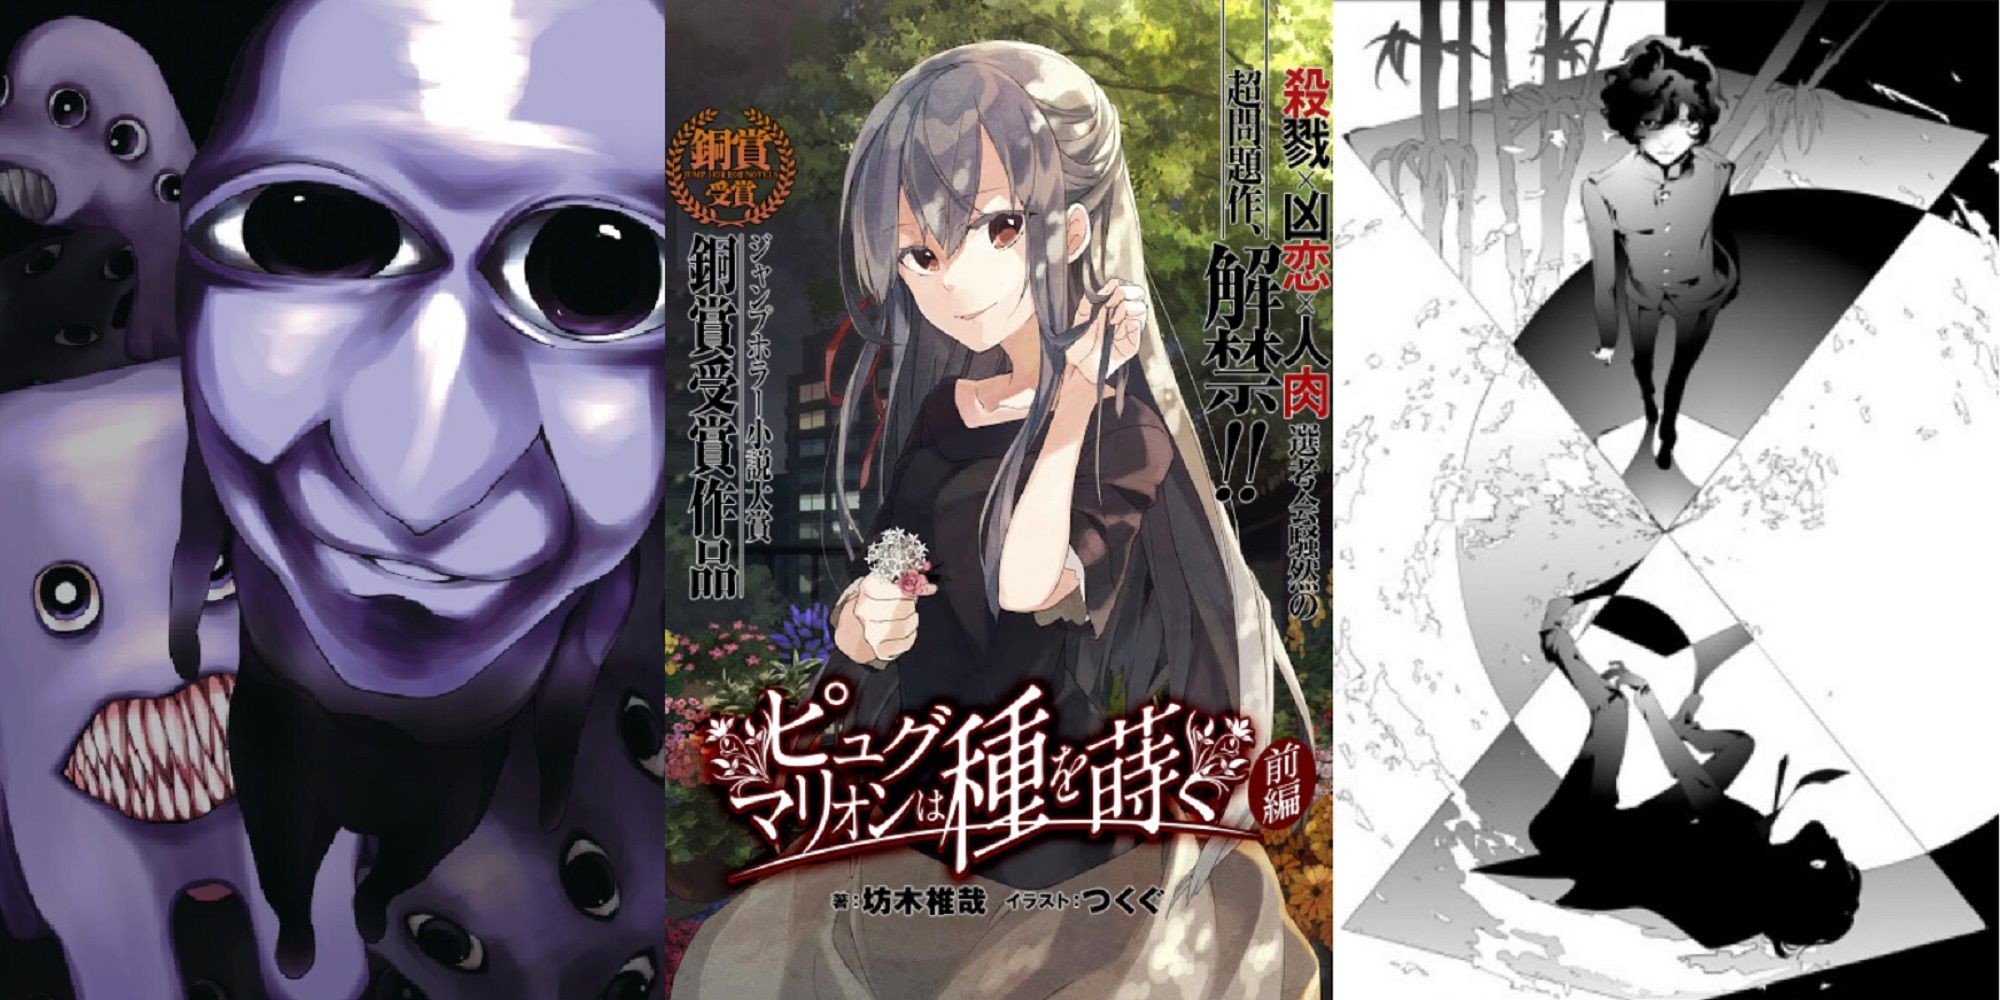 Split image of the demon from Ao Oni, Misaki Iruse from The Pygmalion is Planting Seeds, and Kaname Shiraishi from Yami-Hara